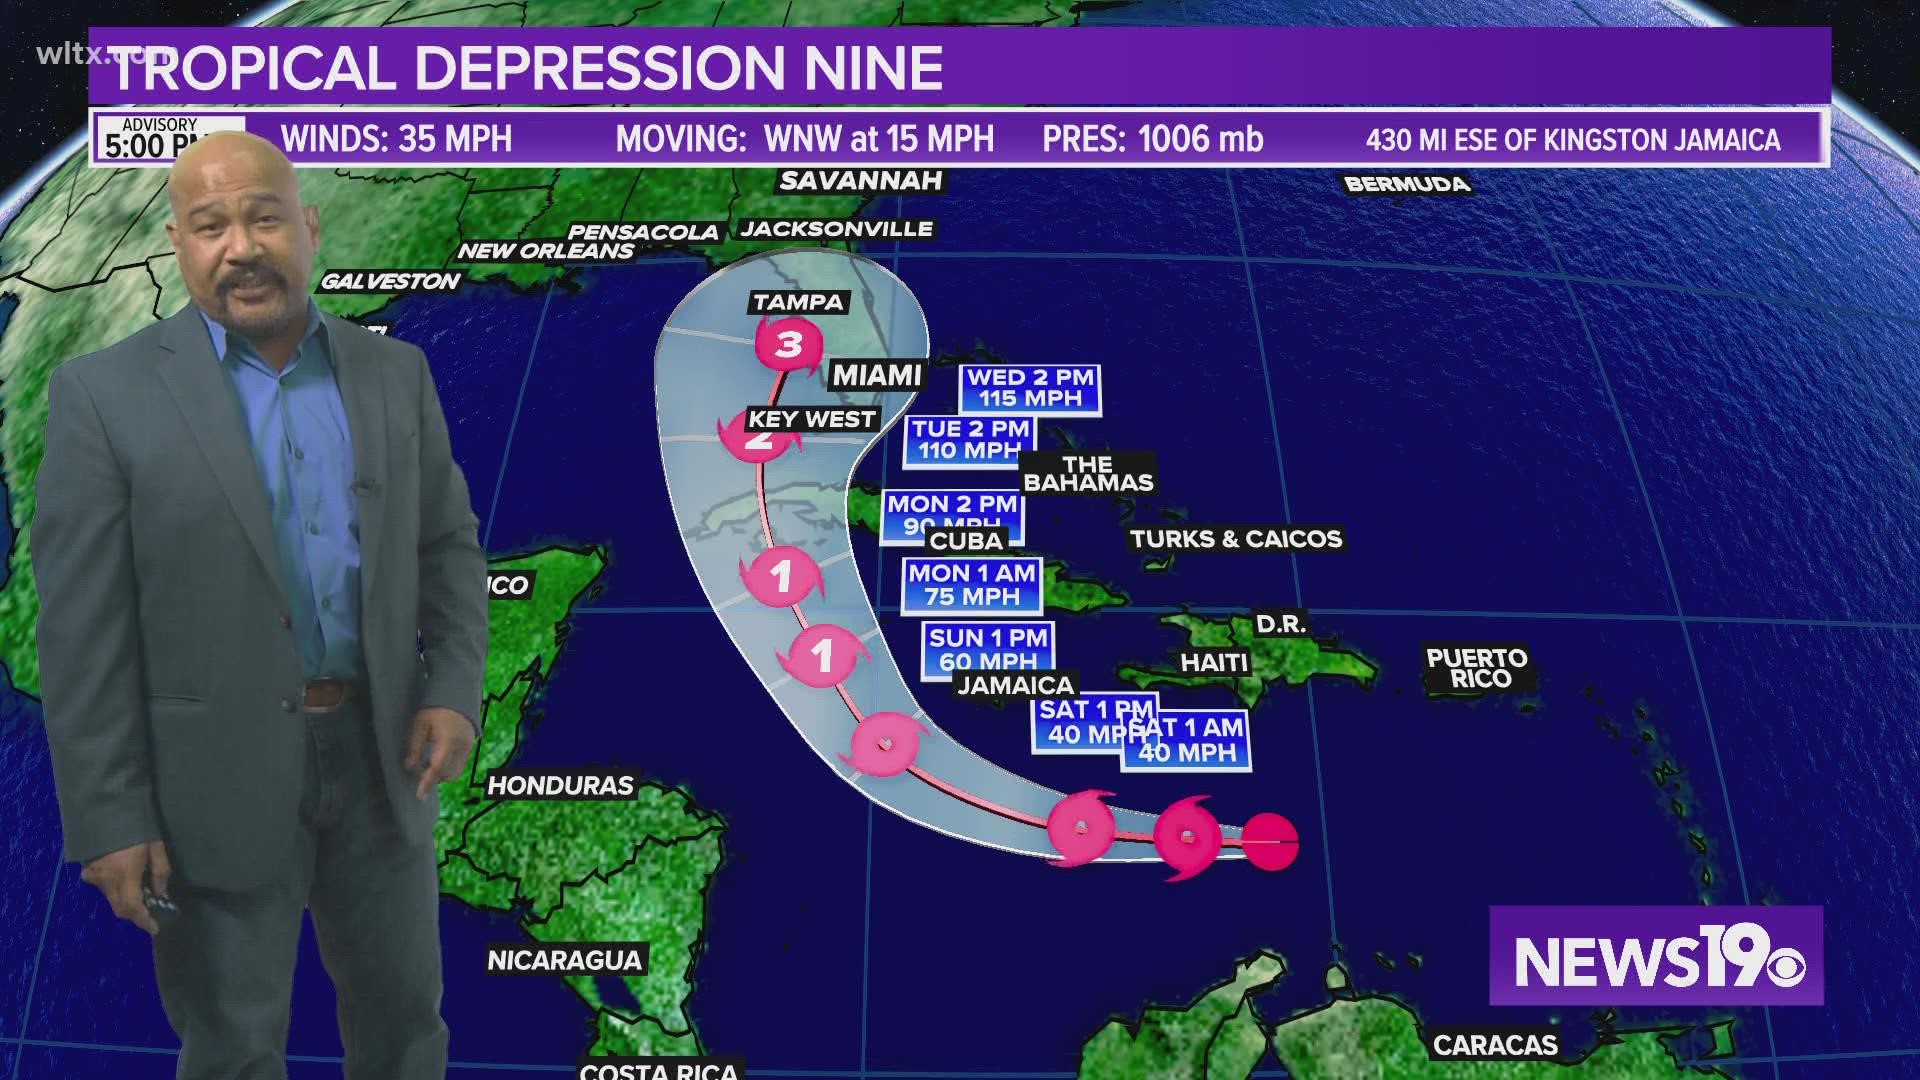 Tropical Depression 9 has formed and the storm could be a hurricane by next week, with Florida in its path.